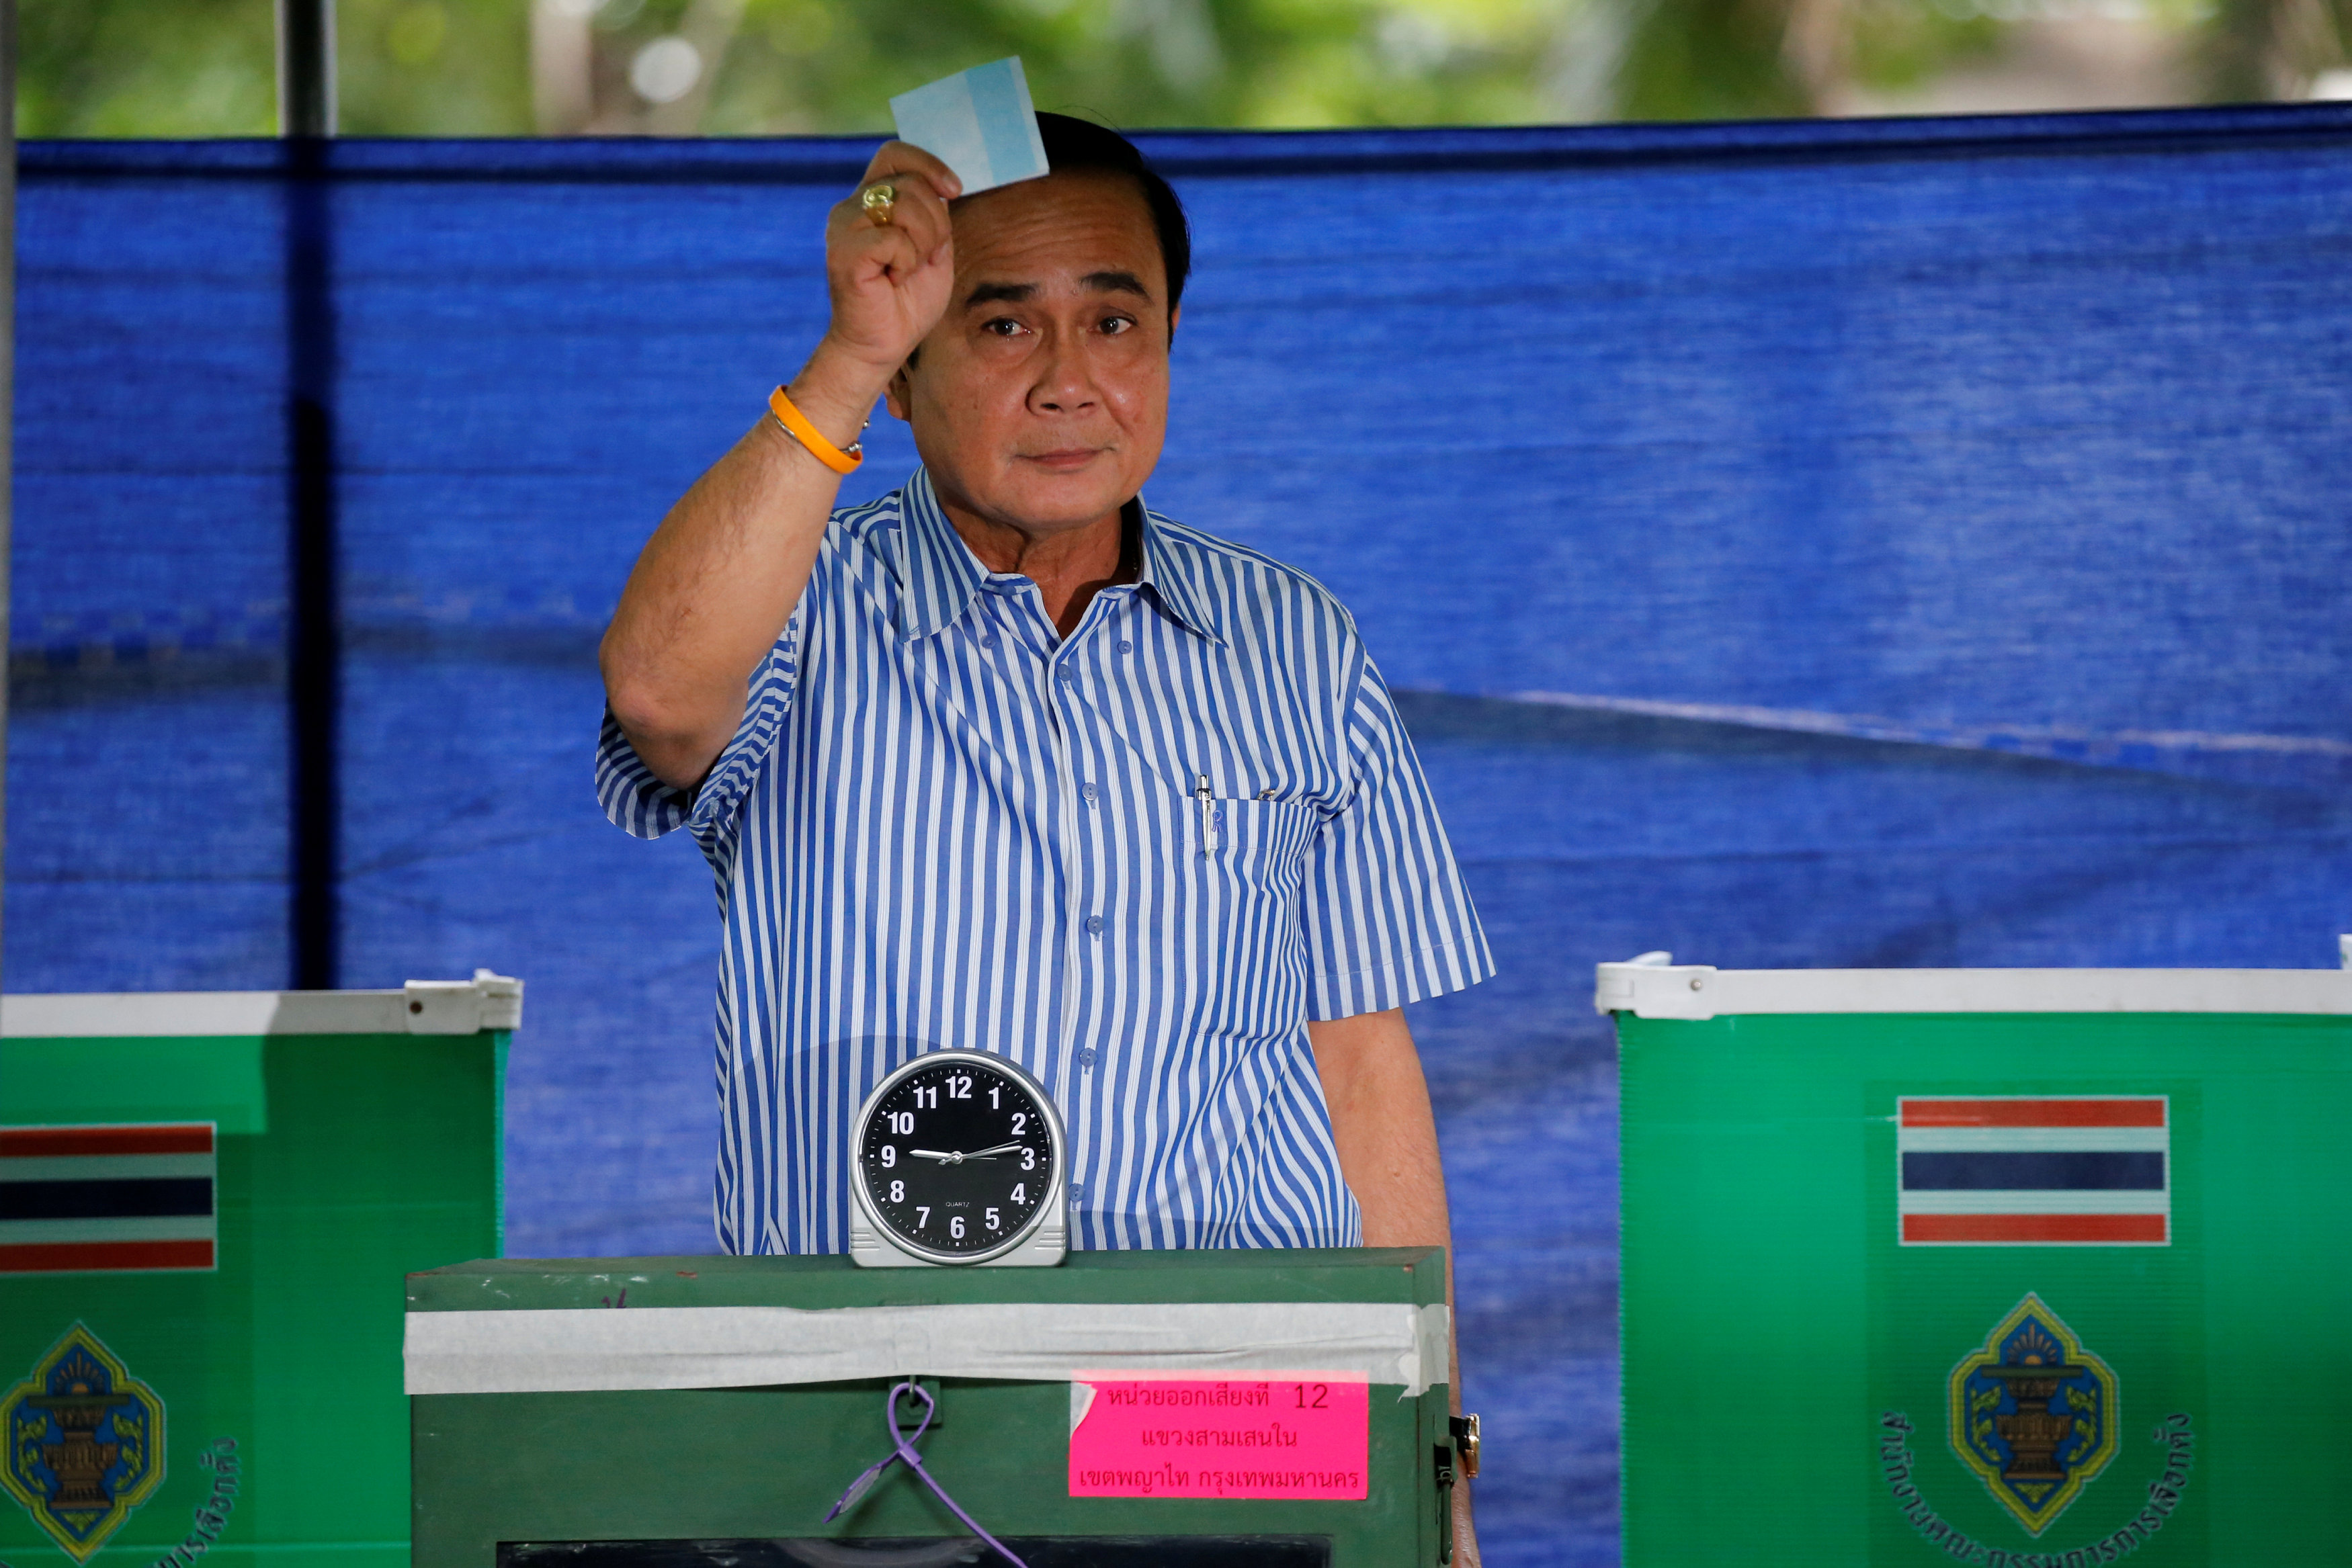 Thai Prime Minister Prayuth Chan-ocha casts his ballot at a polling station during a constitutional referendum vote in Bangkok, Thailand August 7, 2016. u00e2u20acu201d Reuters pic